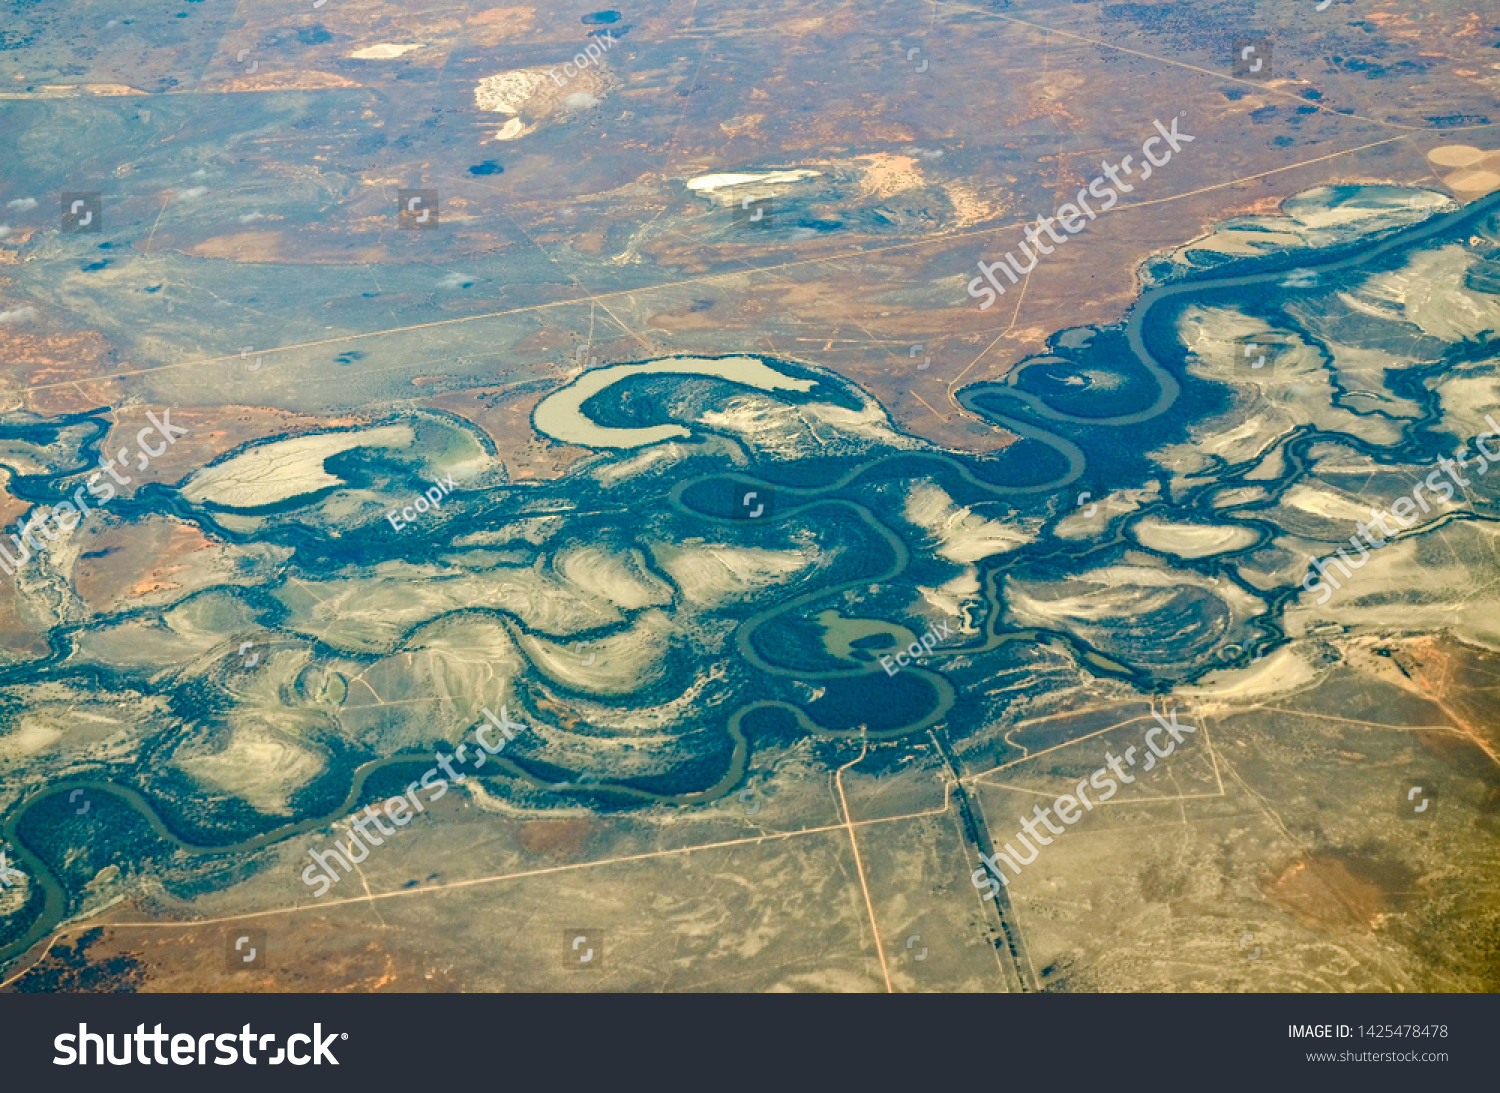 RIVERINA, NEW SOUTH WALES, AUSTRALIA: Aerial view of riverine fluvial landforms in semi-arid pastoral land on the alluvial floodplain soils associated with the Murray-Darling river system. #1425478478